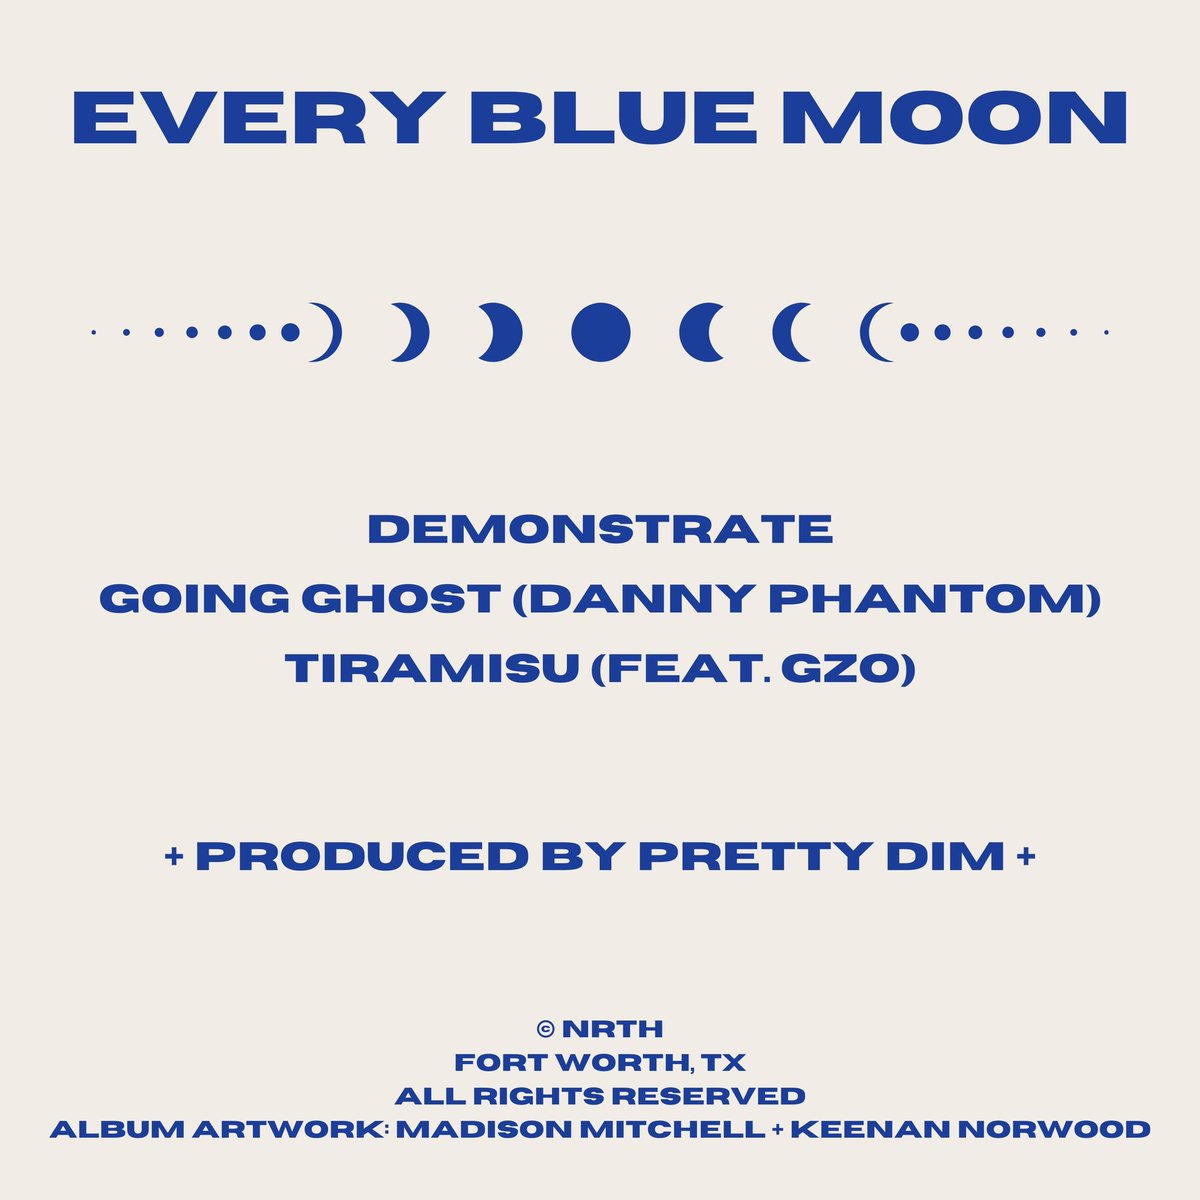 my newest ep. [3 songs] “every blue moon” 🔵 out now via @even_biz • even.biz/releases/every… PAY WHAT YOU WANT. #BuyTheArtFromTheArtist shoutout @larussell !